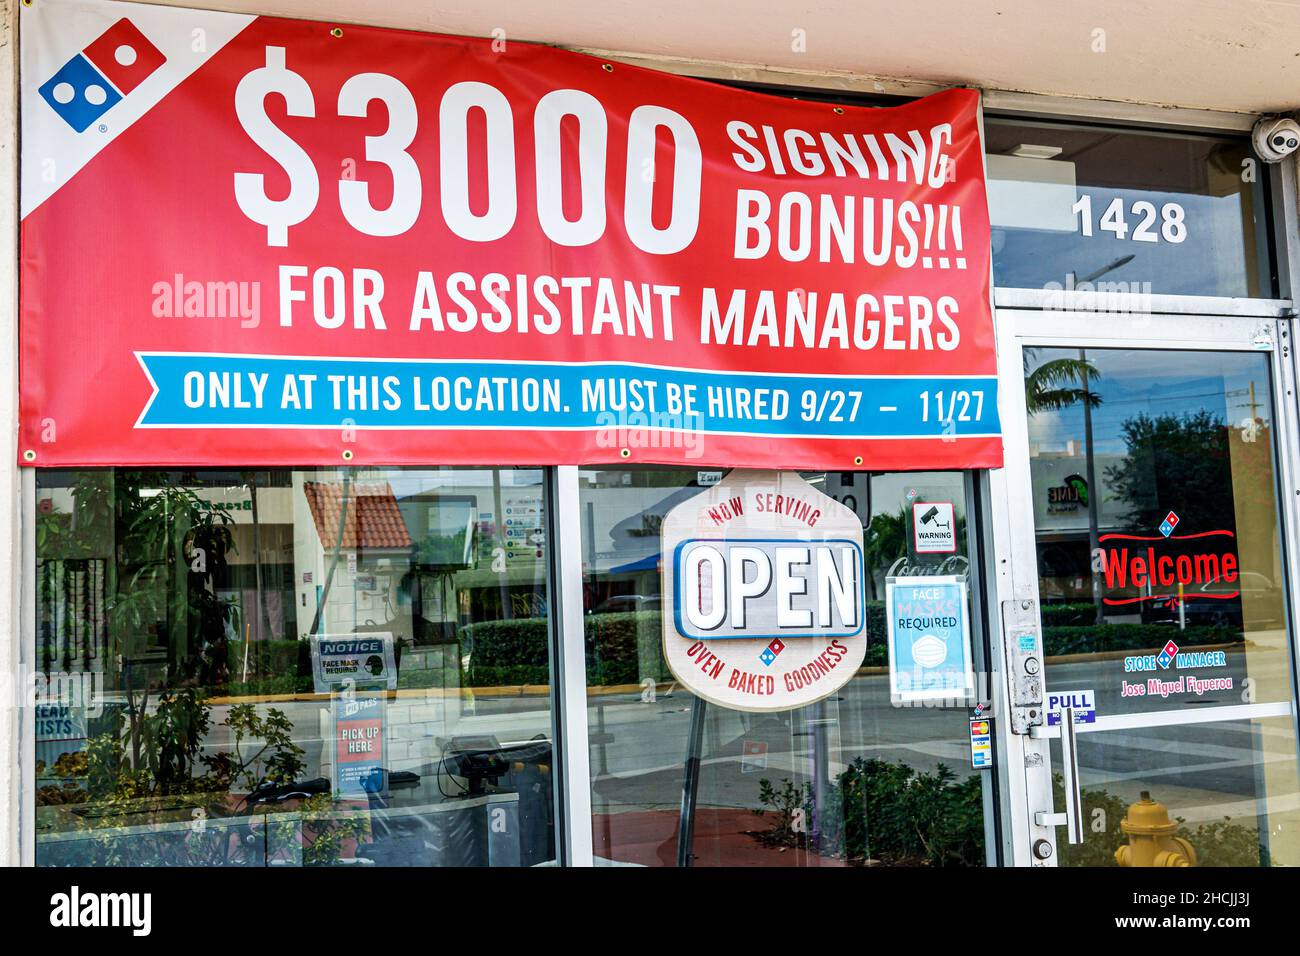 Miami Beach Florida Domino's Pizza exterior entrance sign $3000 signing bonus assistant managers job opening openings employment offered incentive now Stock Photo